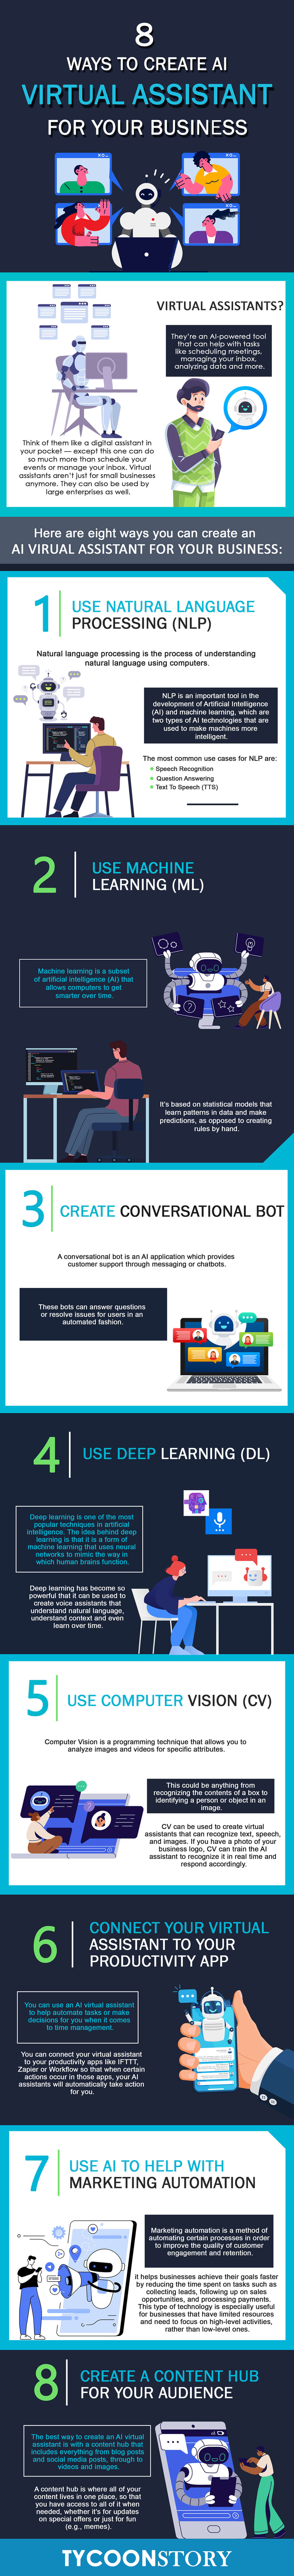 8 ways to create ai virtual assistant for your business digital marketing